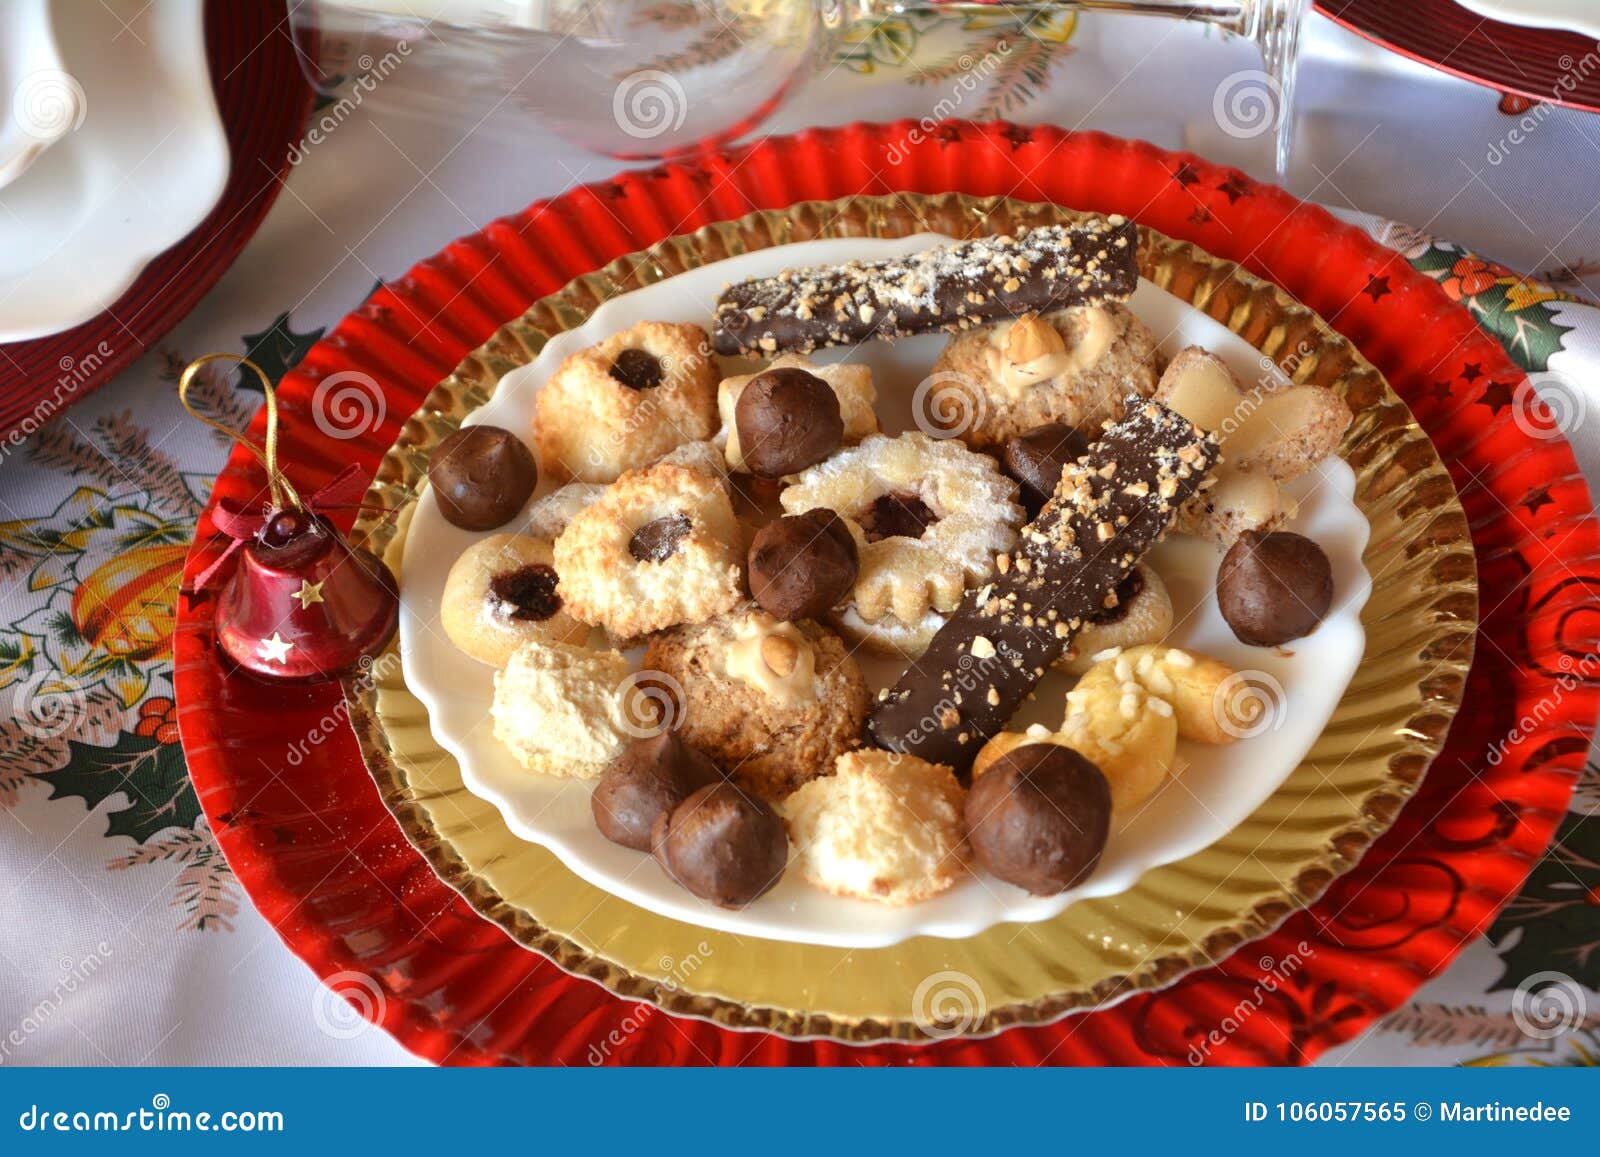 Christmas Cookies Without Nuts Or Coconut / Christmas Cookies On A Plate Decorated On A Table ...